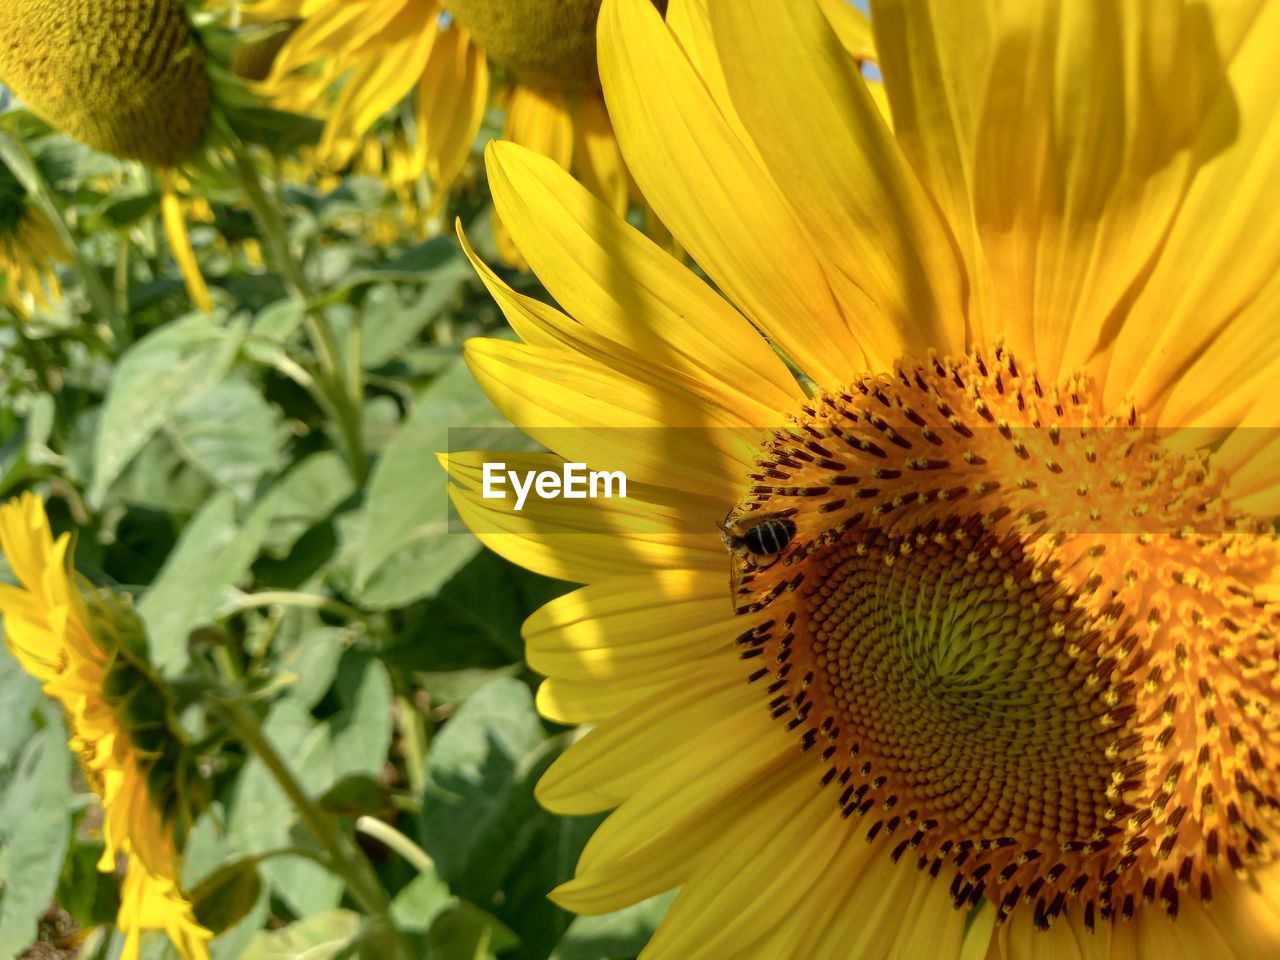 CLOSE-UP OF INSECT ON SUNFLOWER AT FLOWER